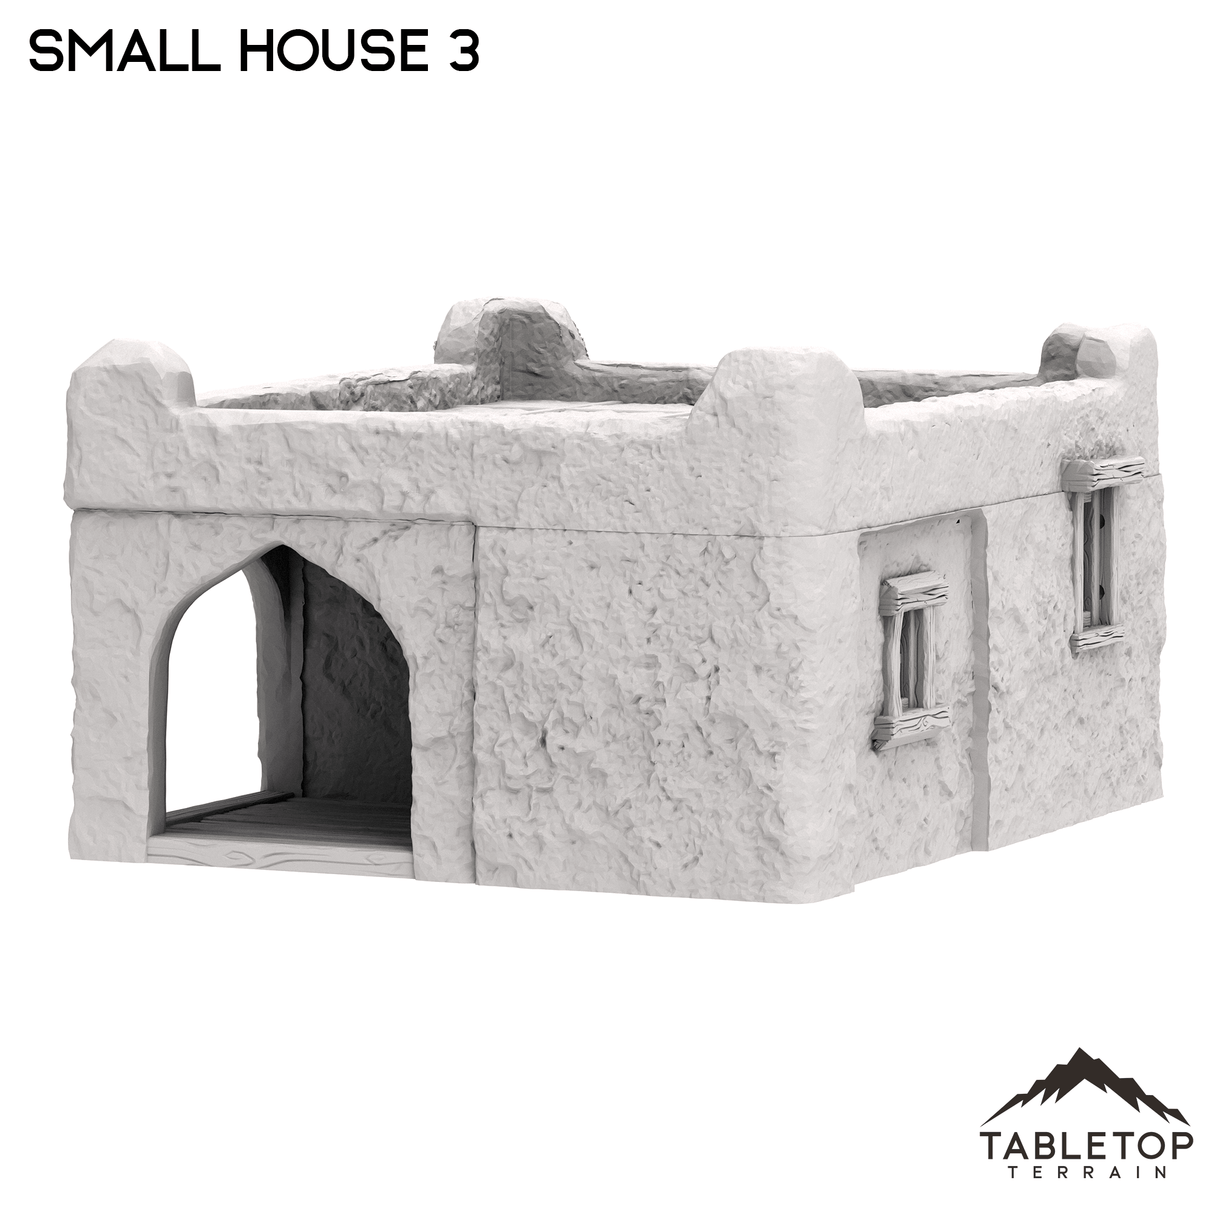 Tabletop Terrain Building Spanish Small House 3 - Old Wild Western Rush